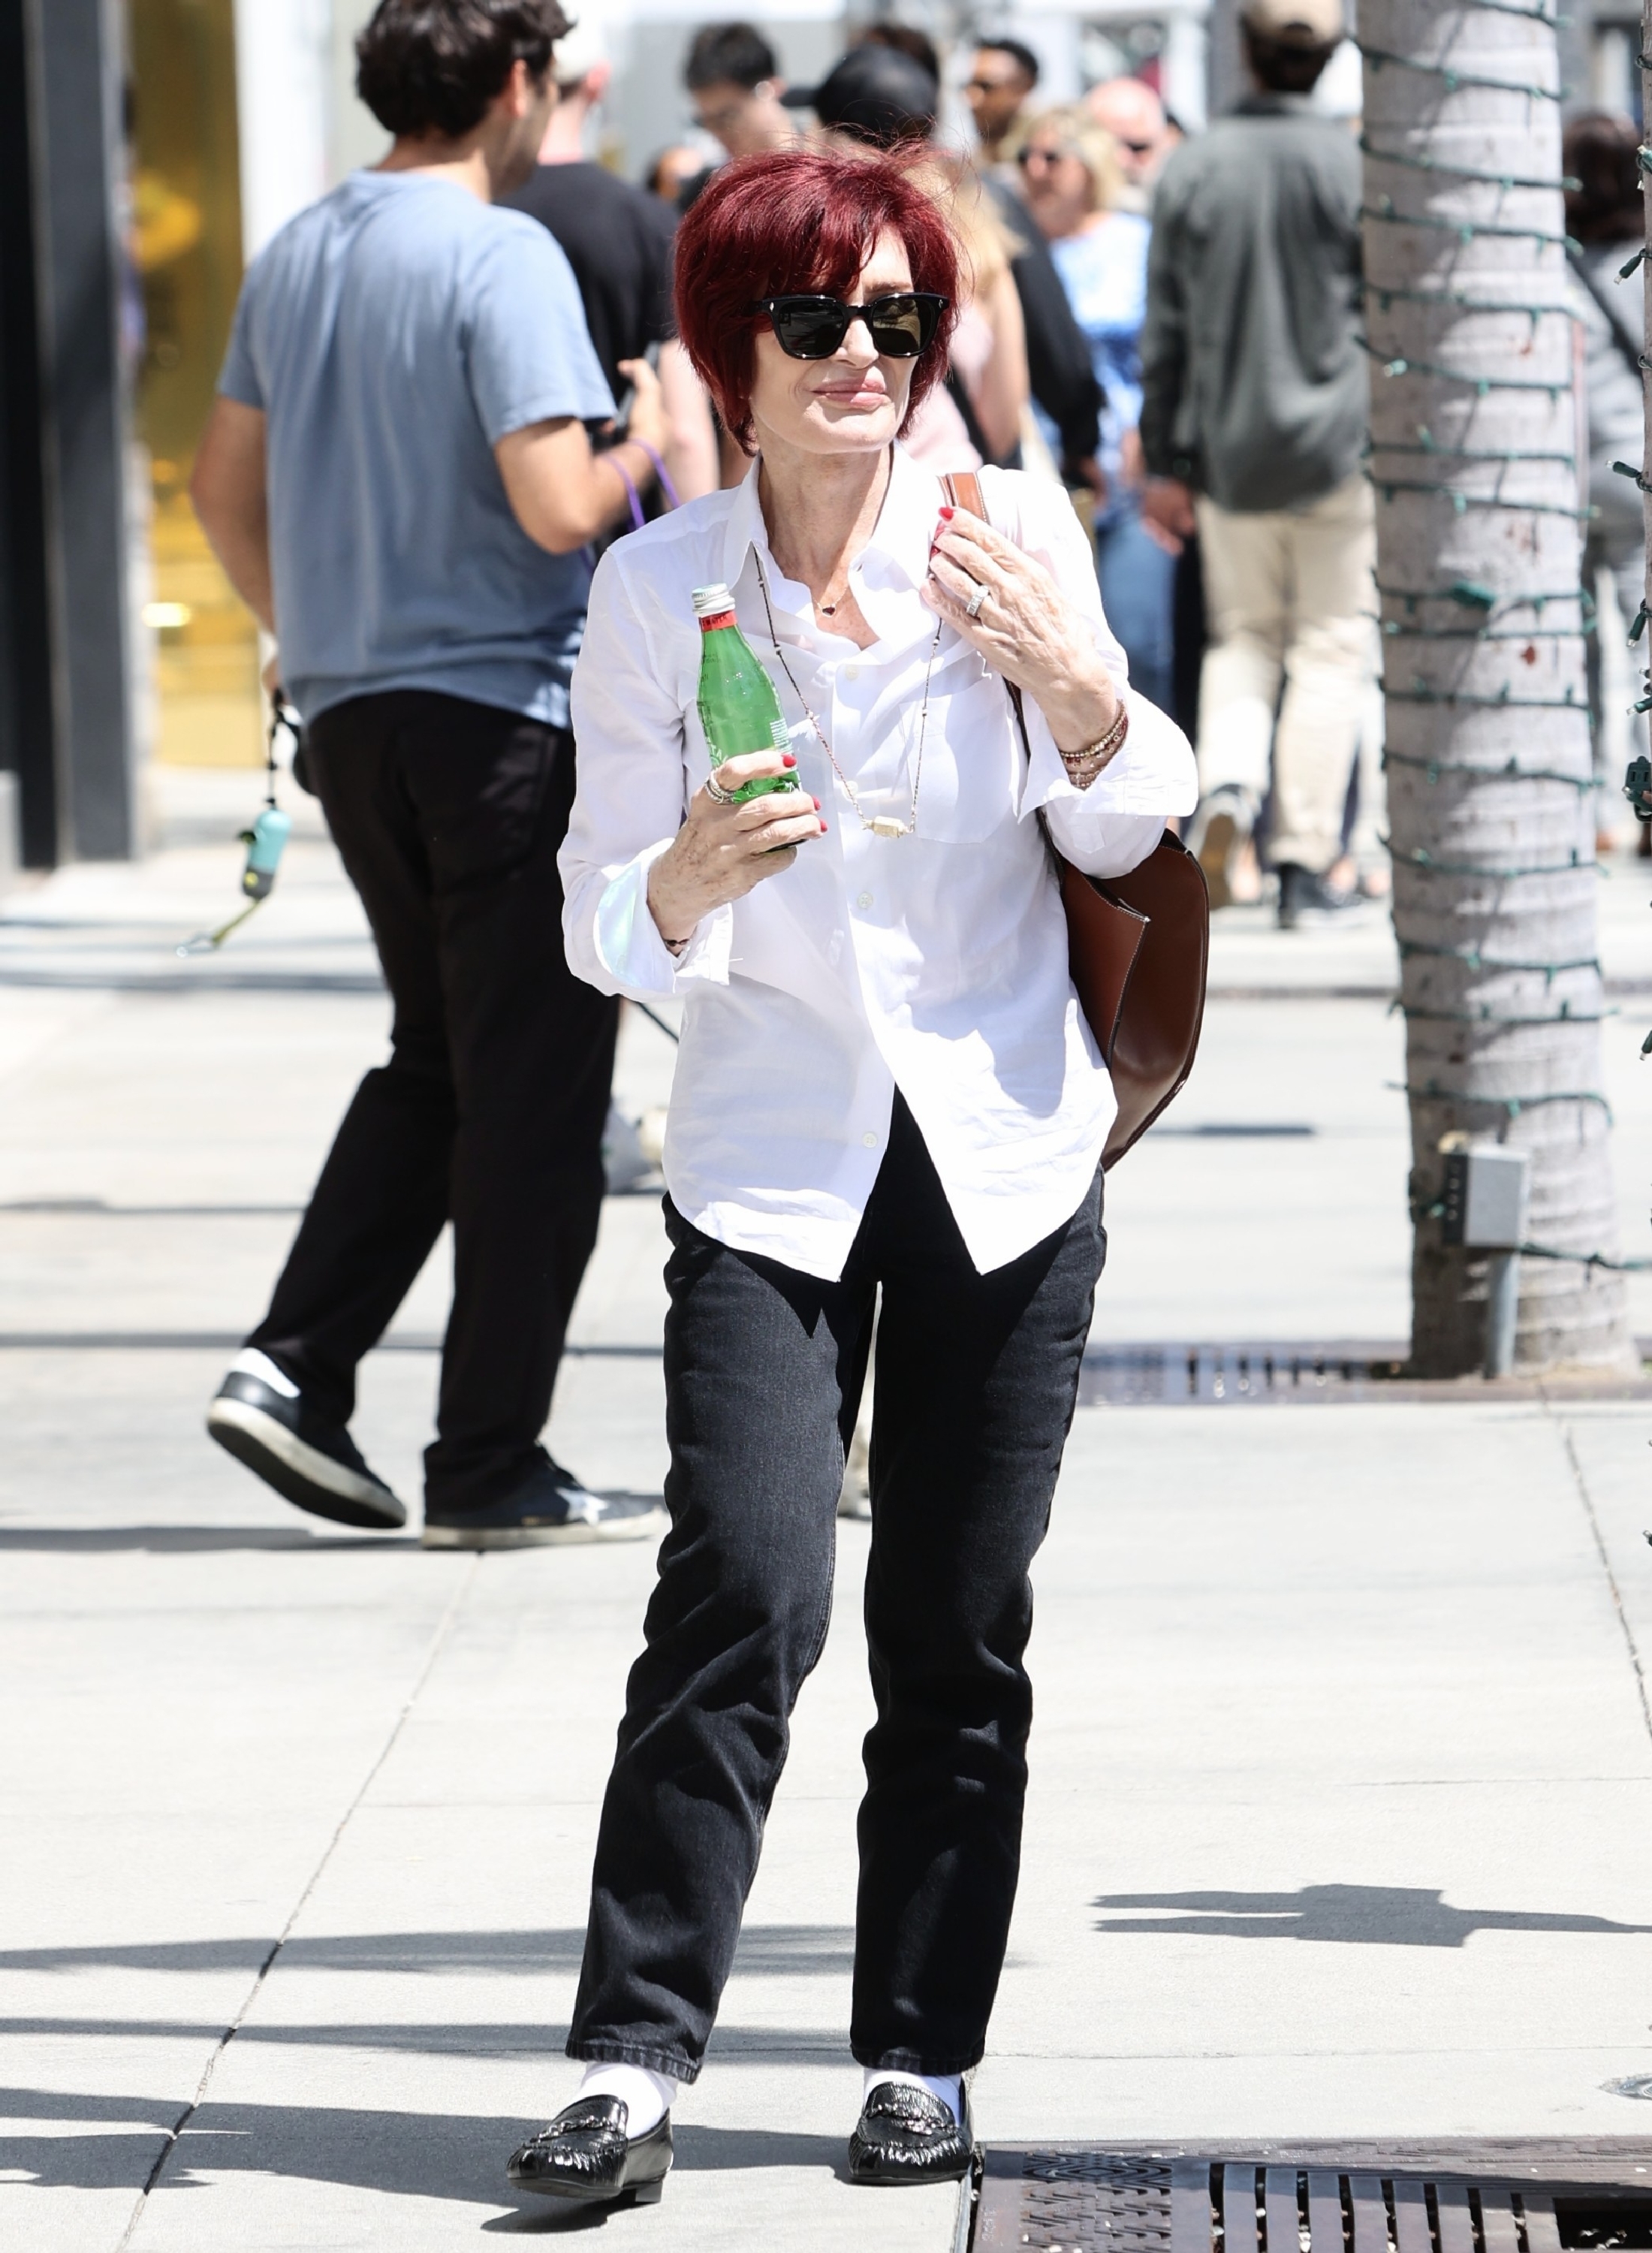 Close-up of Sharon on the street in a shirt and pants and holding a beverage